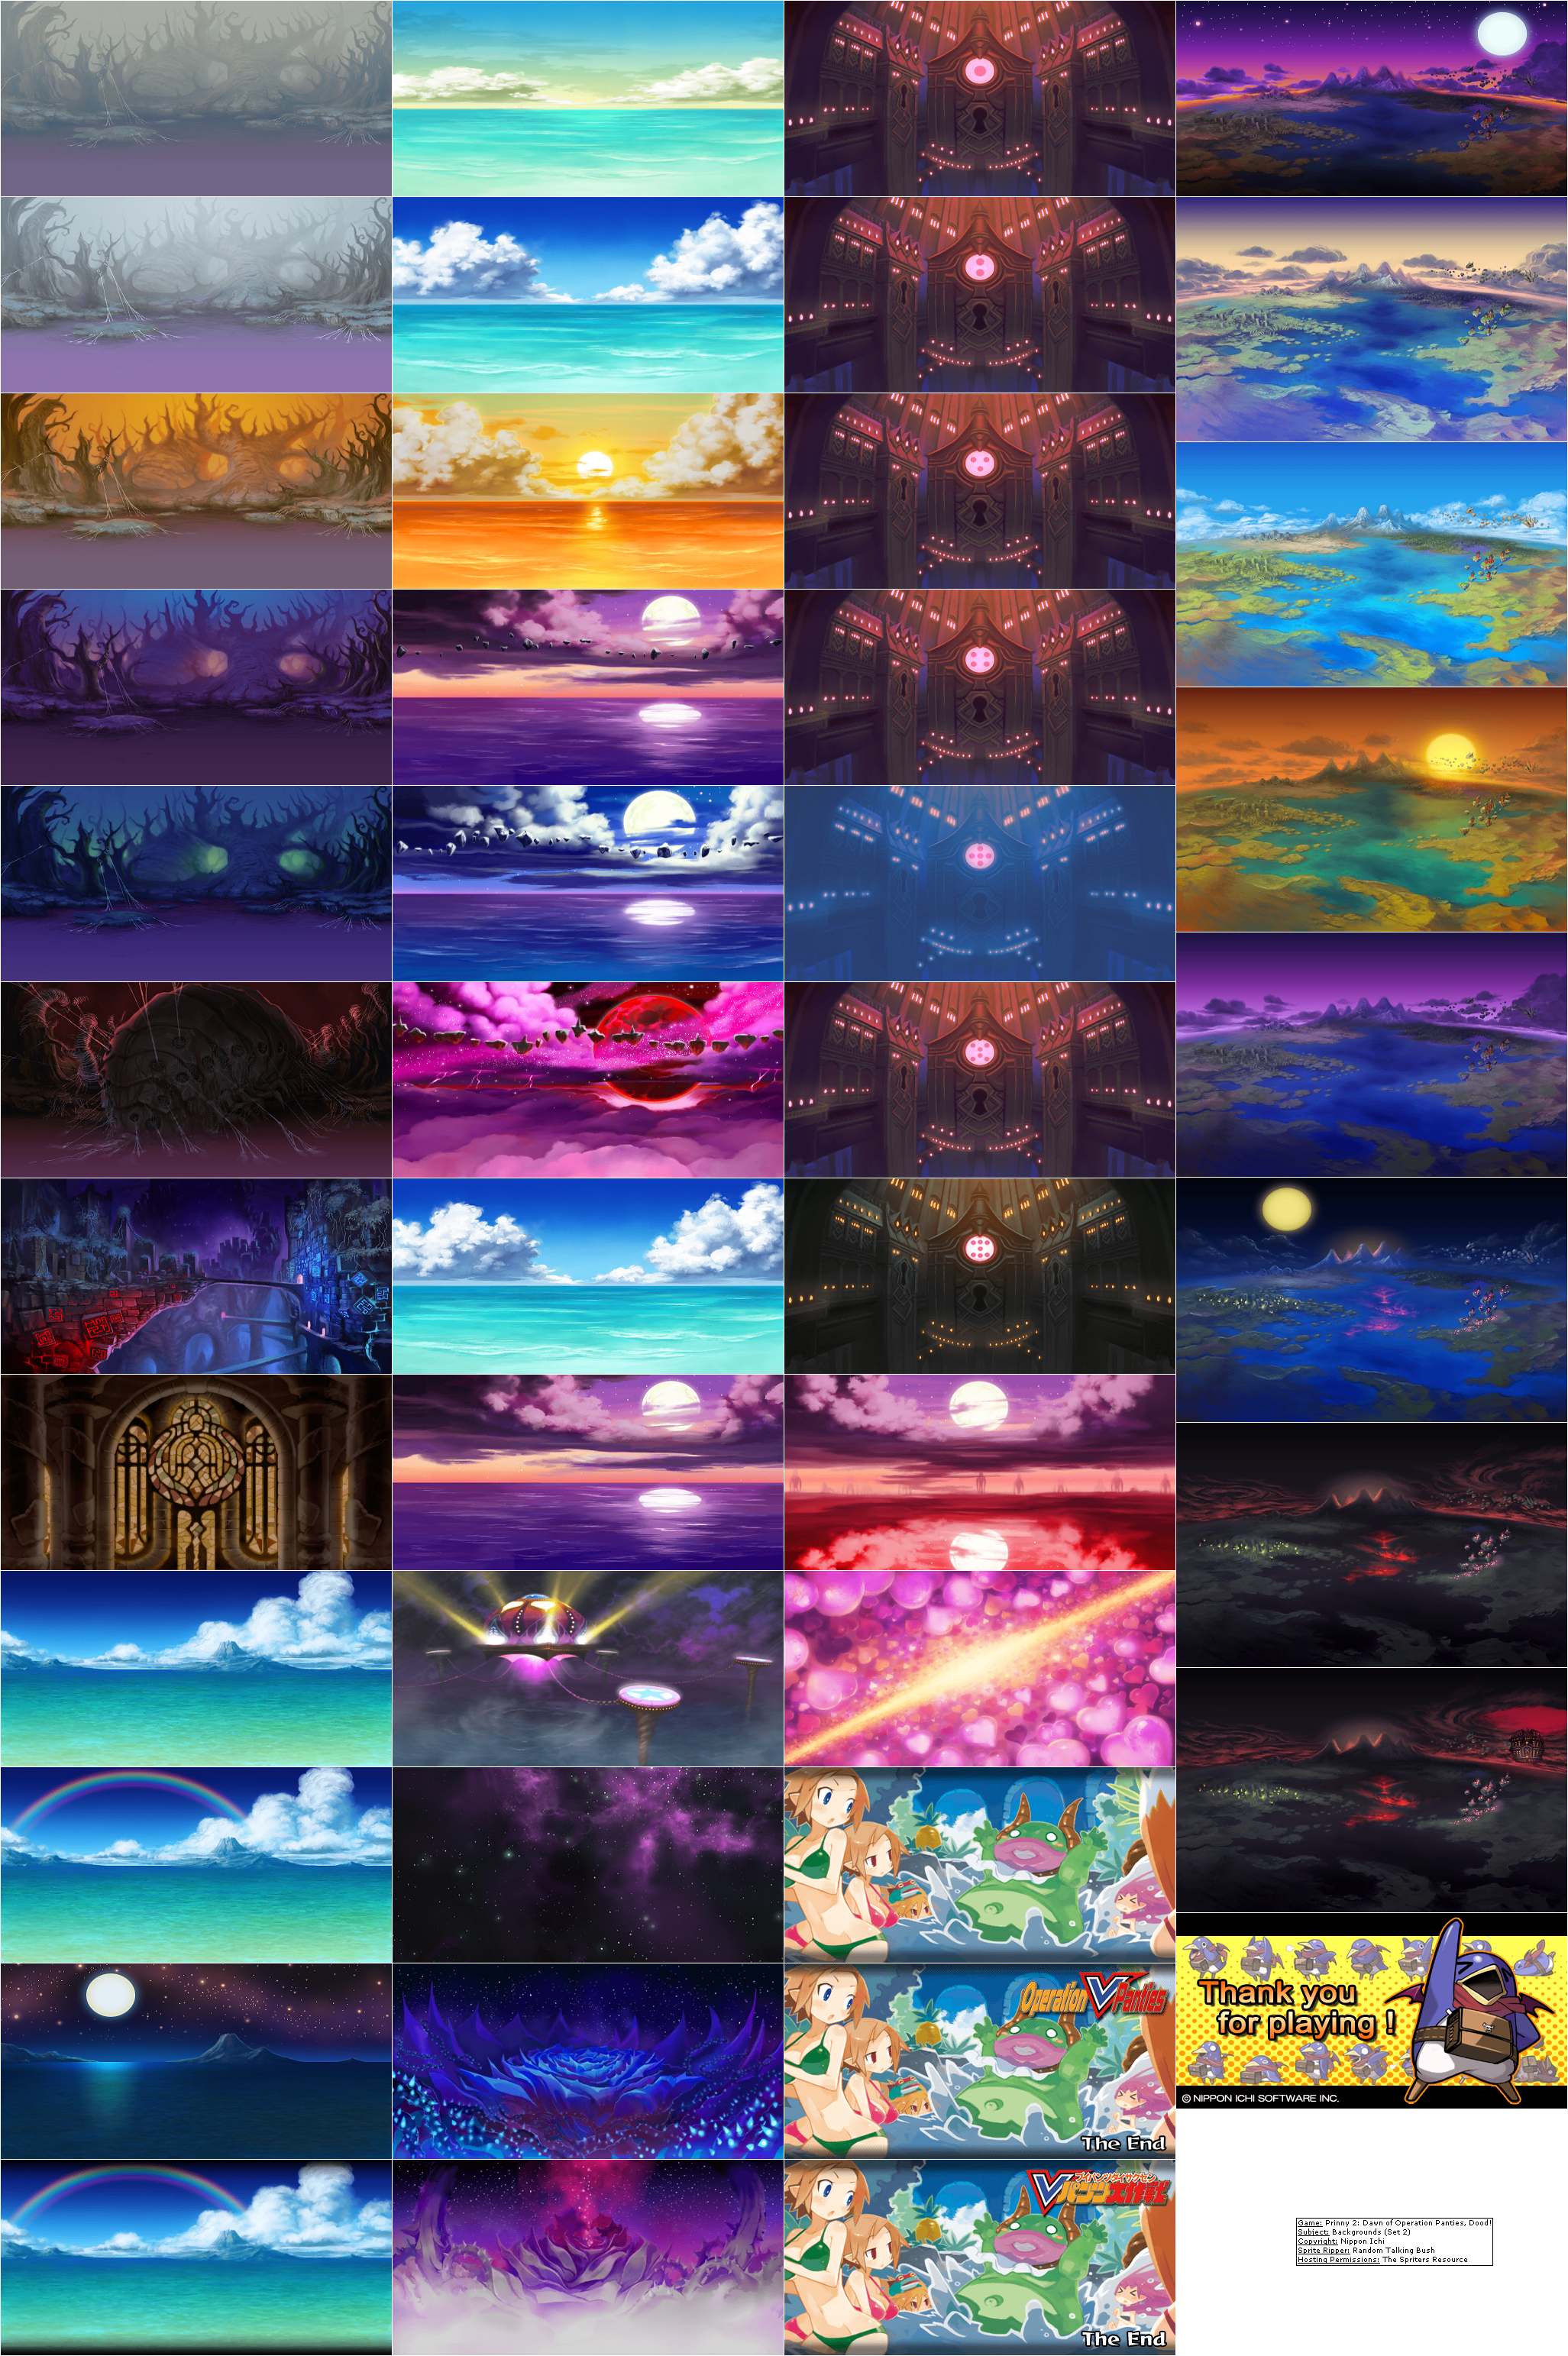 Backgrounds (2 / 3)